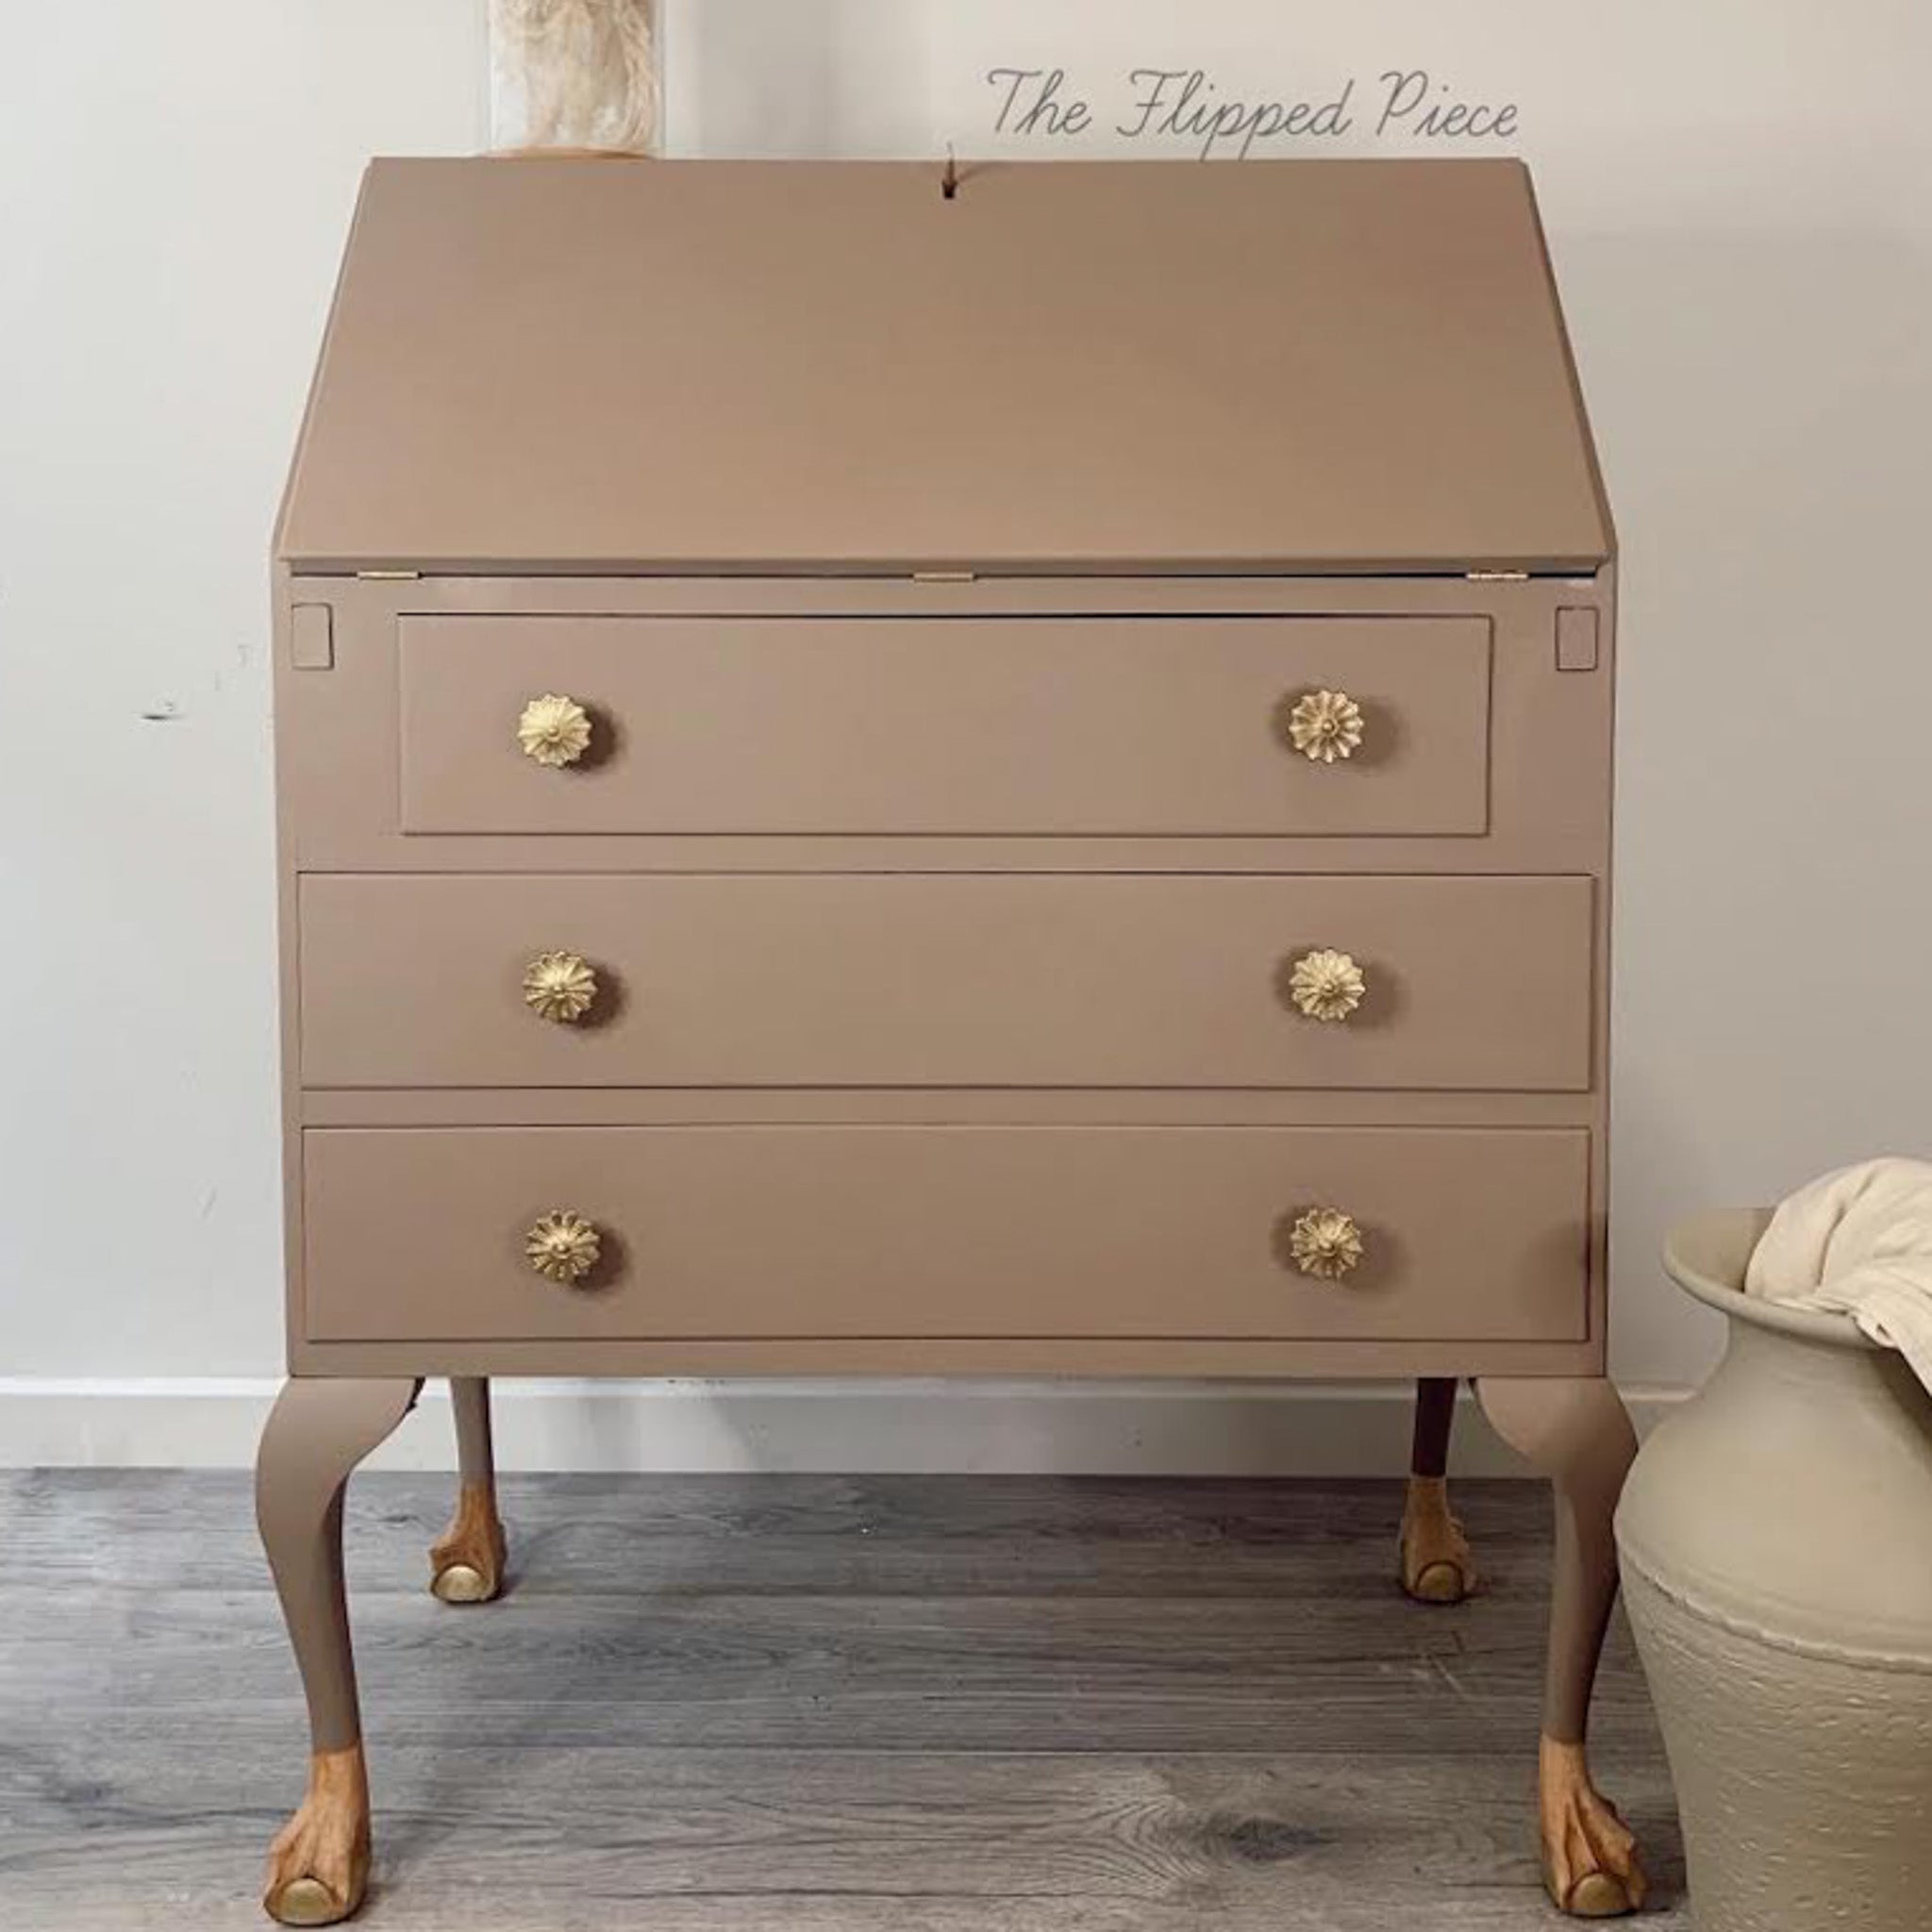 A vintage secretary's desk refurbished by The Flipped Piece is painted in Dixie Belle's Mud Puddle chalk mineral paint.